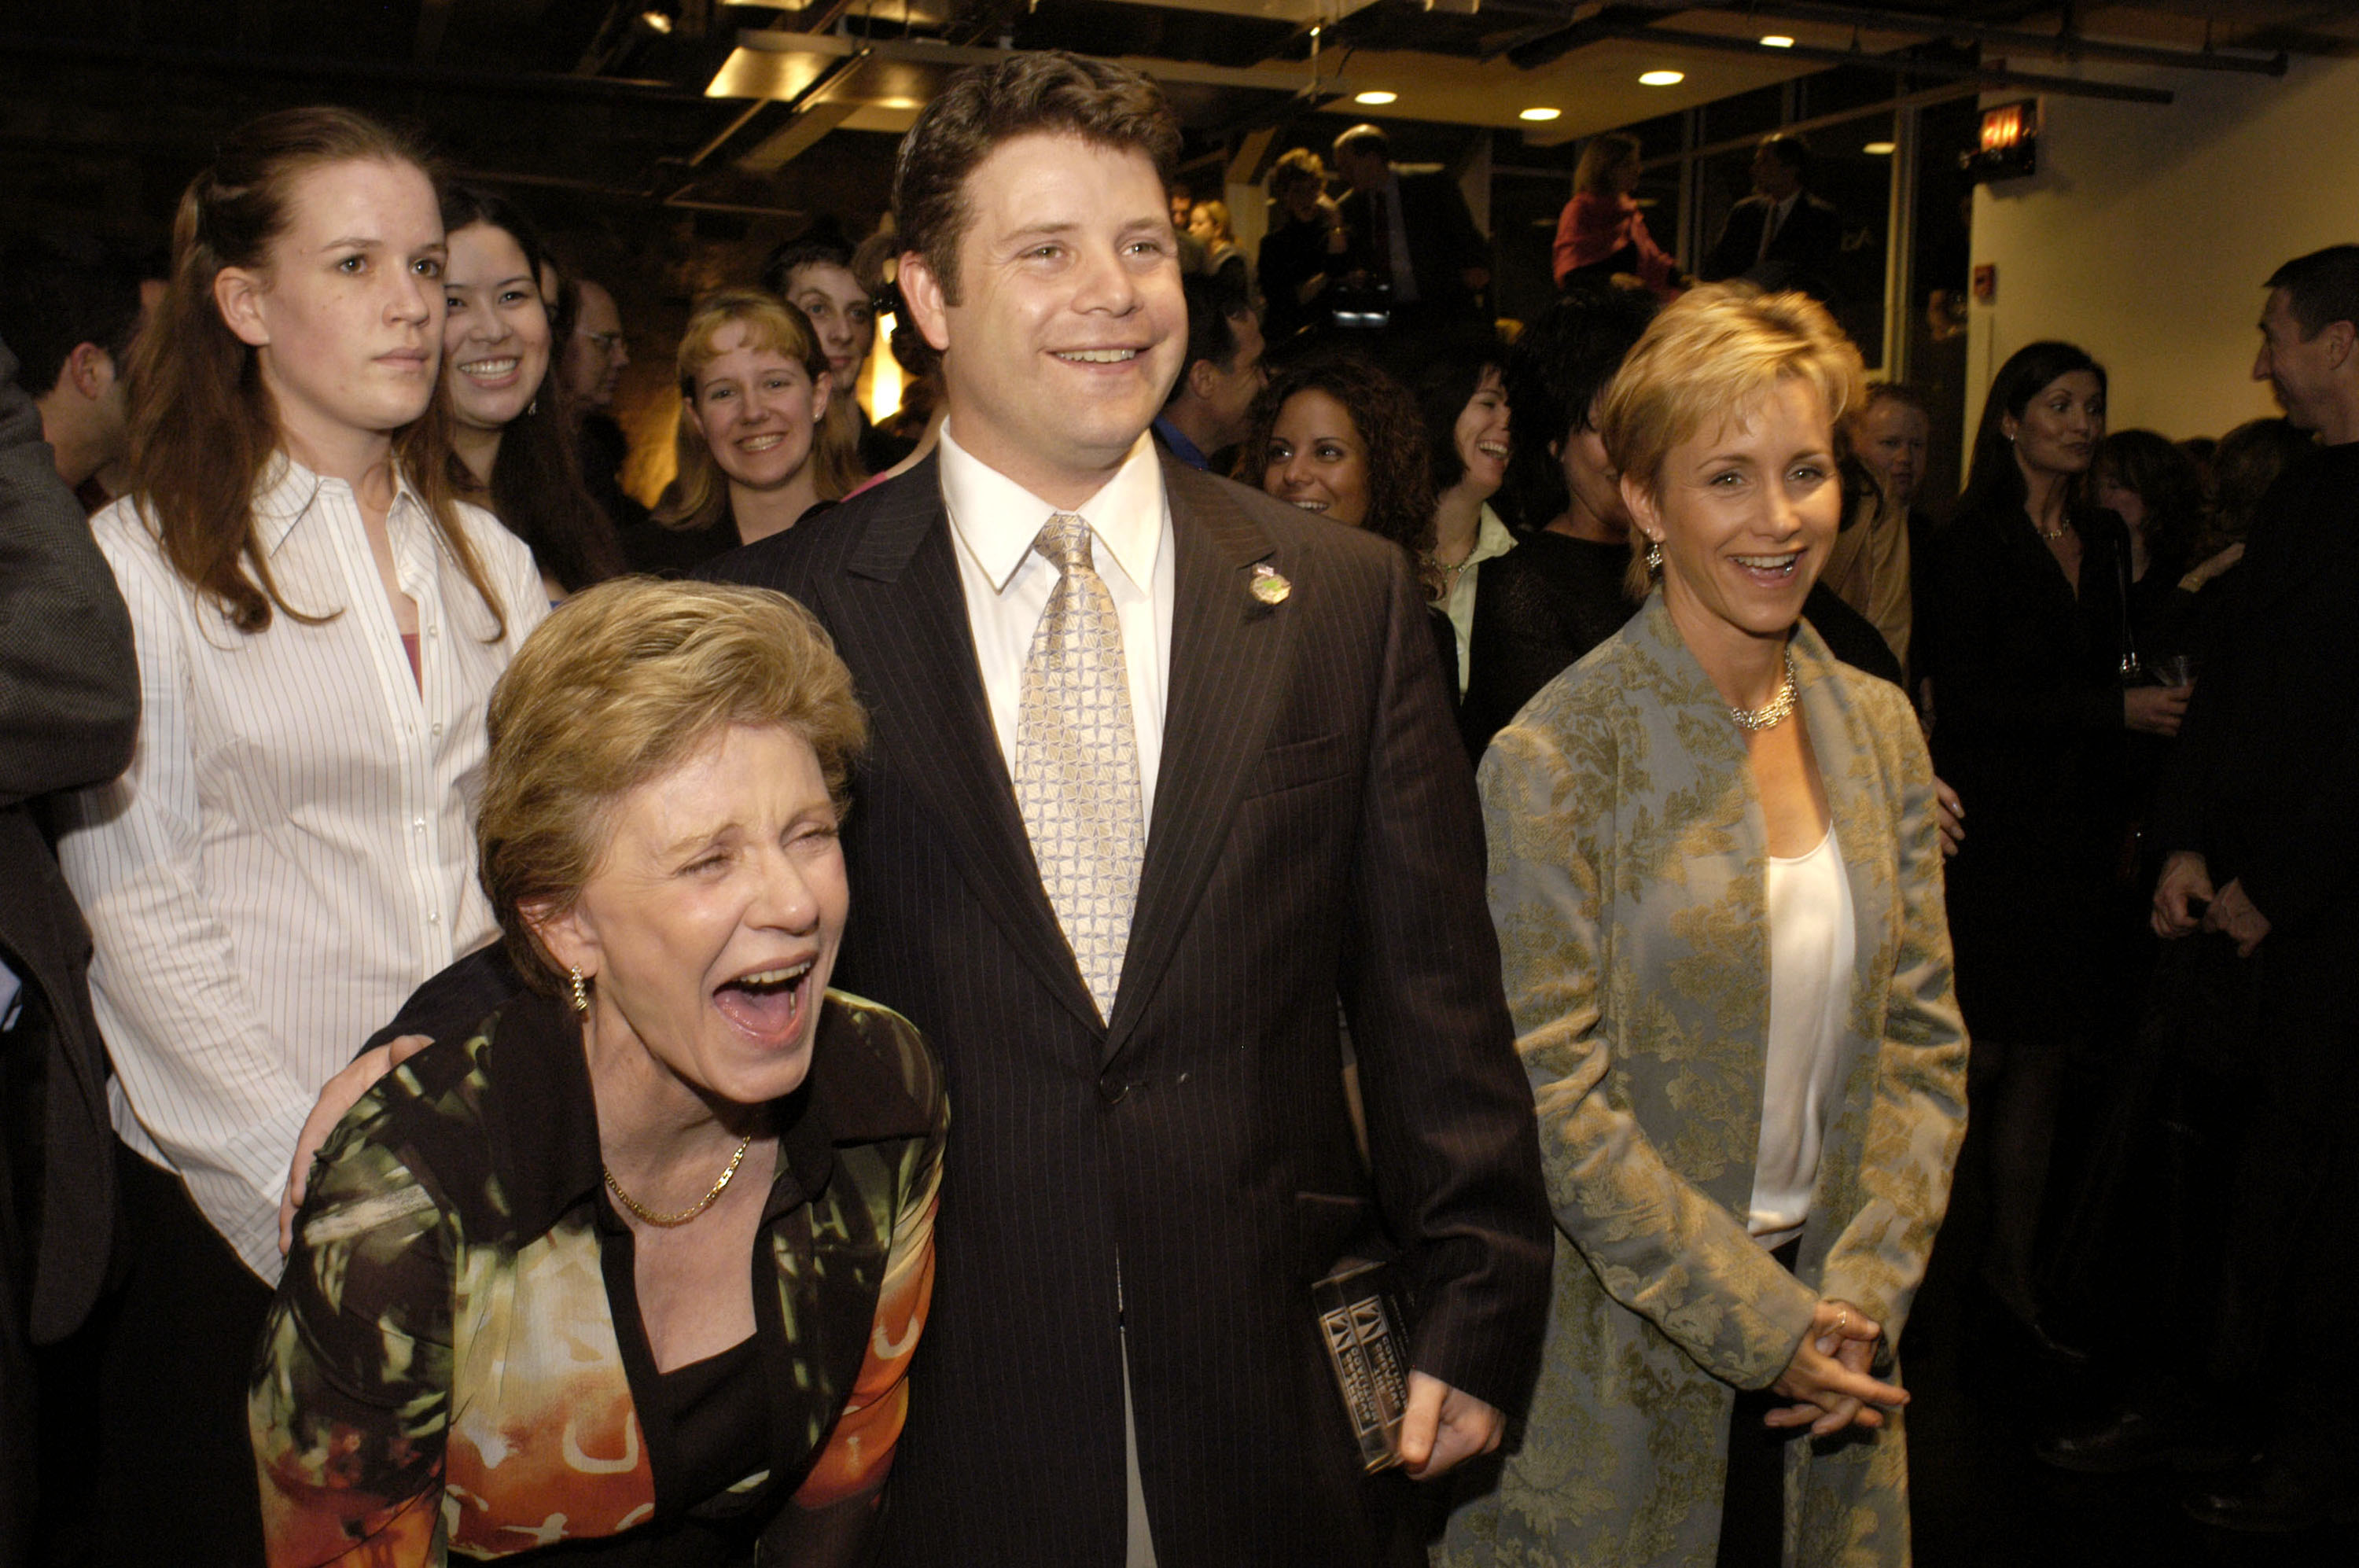 Patty Duke, Sean Astin, and Gabriella Carteris at the Creative Coalition's 2004 Capitol Hill Spotlight Awards Ceremony on March 30, 2004 | Source: Getty Images